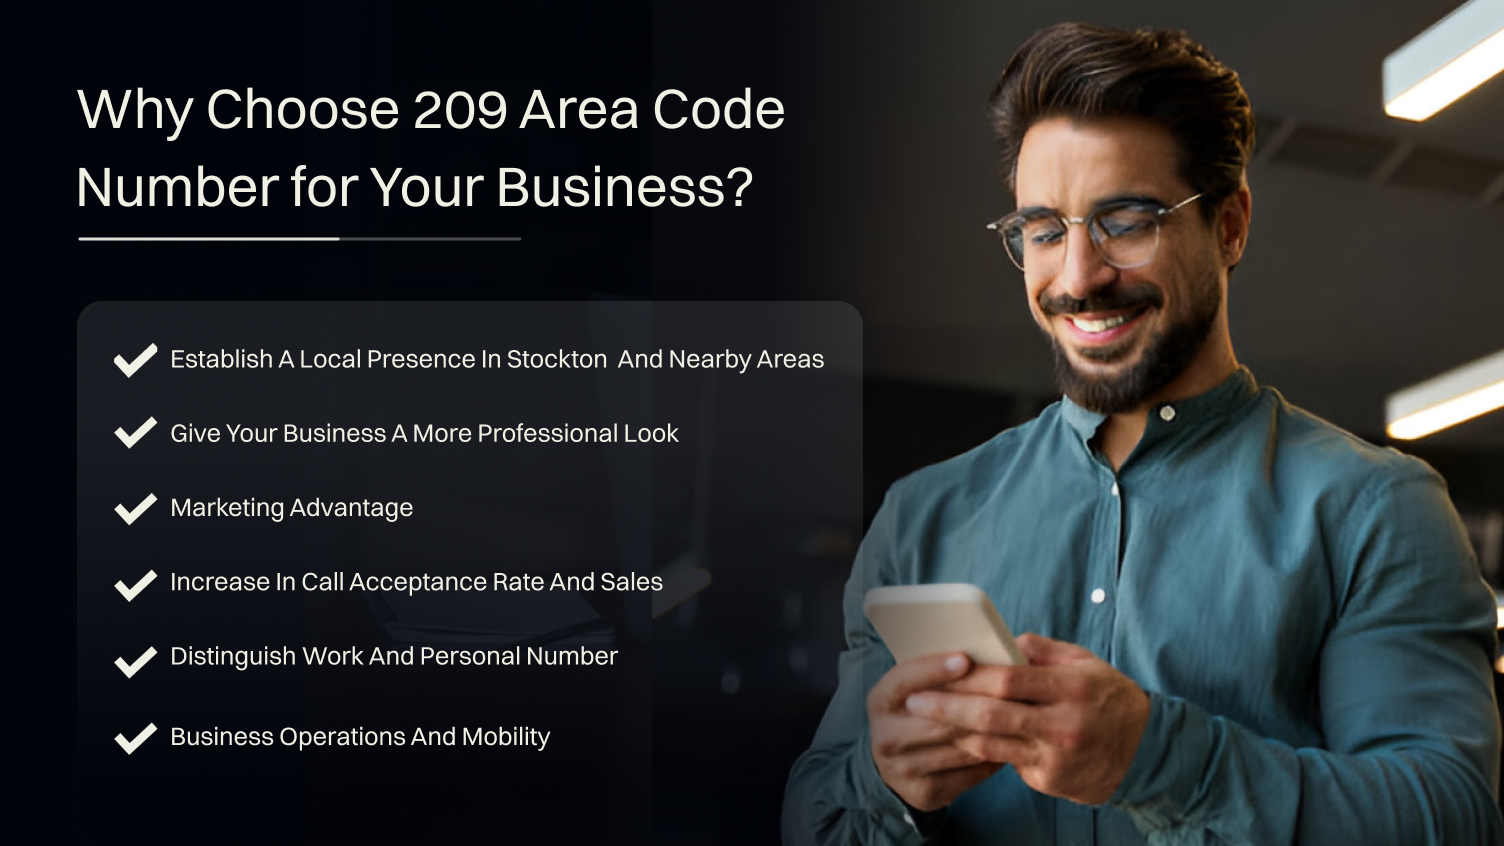 Why Choose 209 Area Code Number for Your Business?